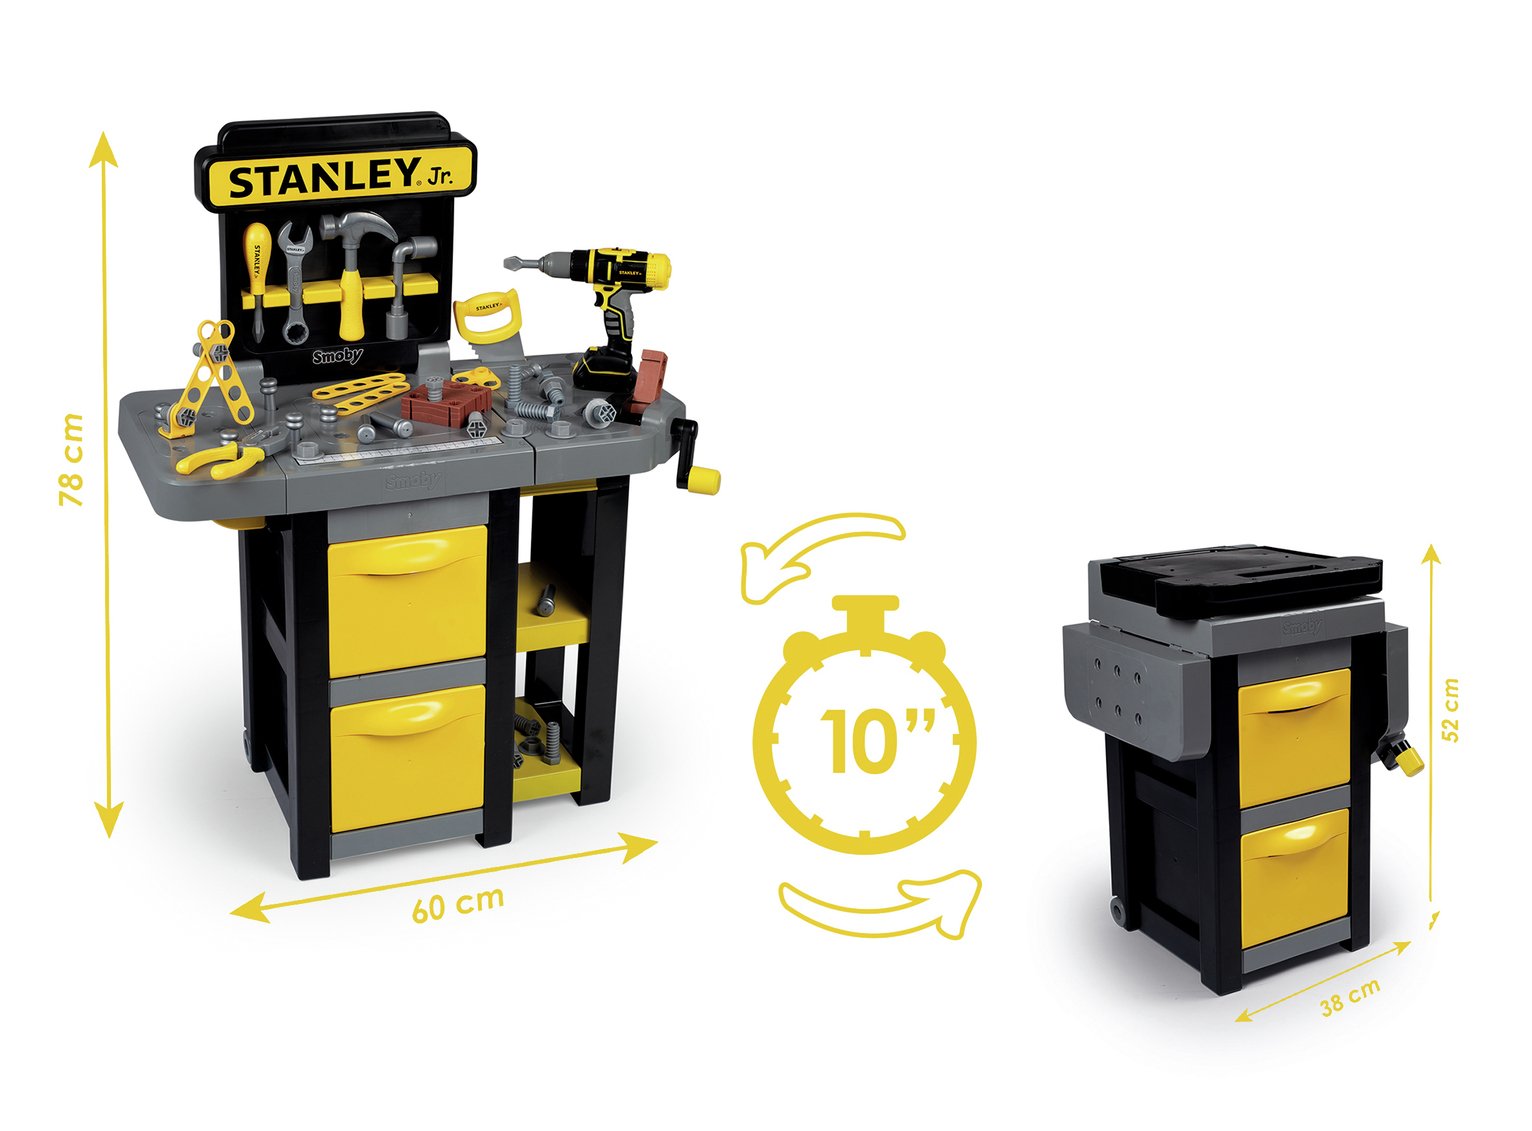 Smoby Toy Stanley Workbench Review